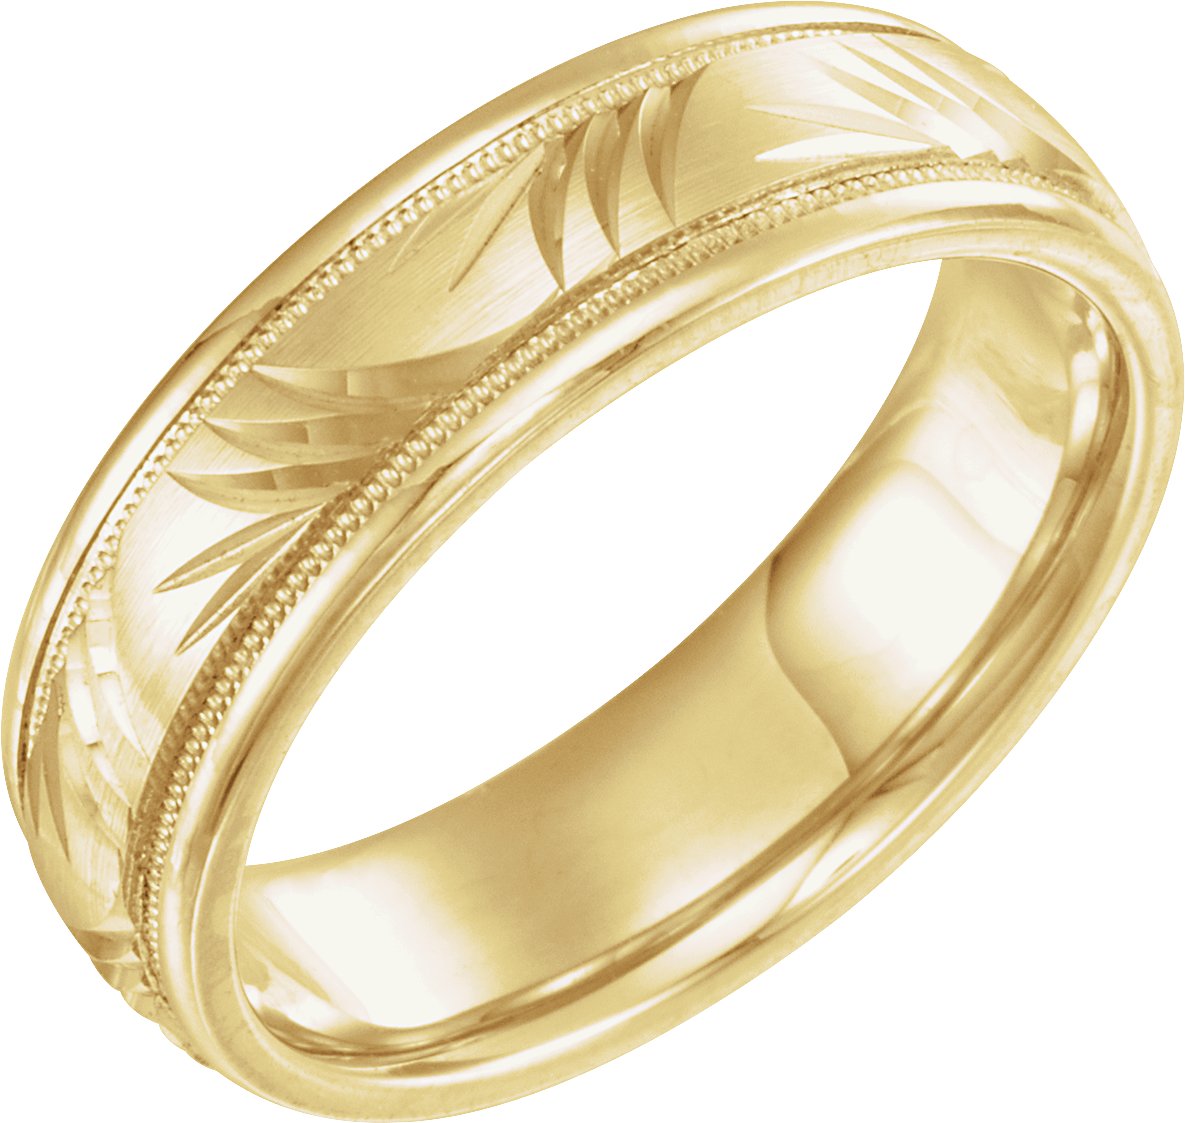 14K Yellow 6 mm Design Band Size 14.5 Ref 203444